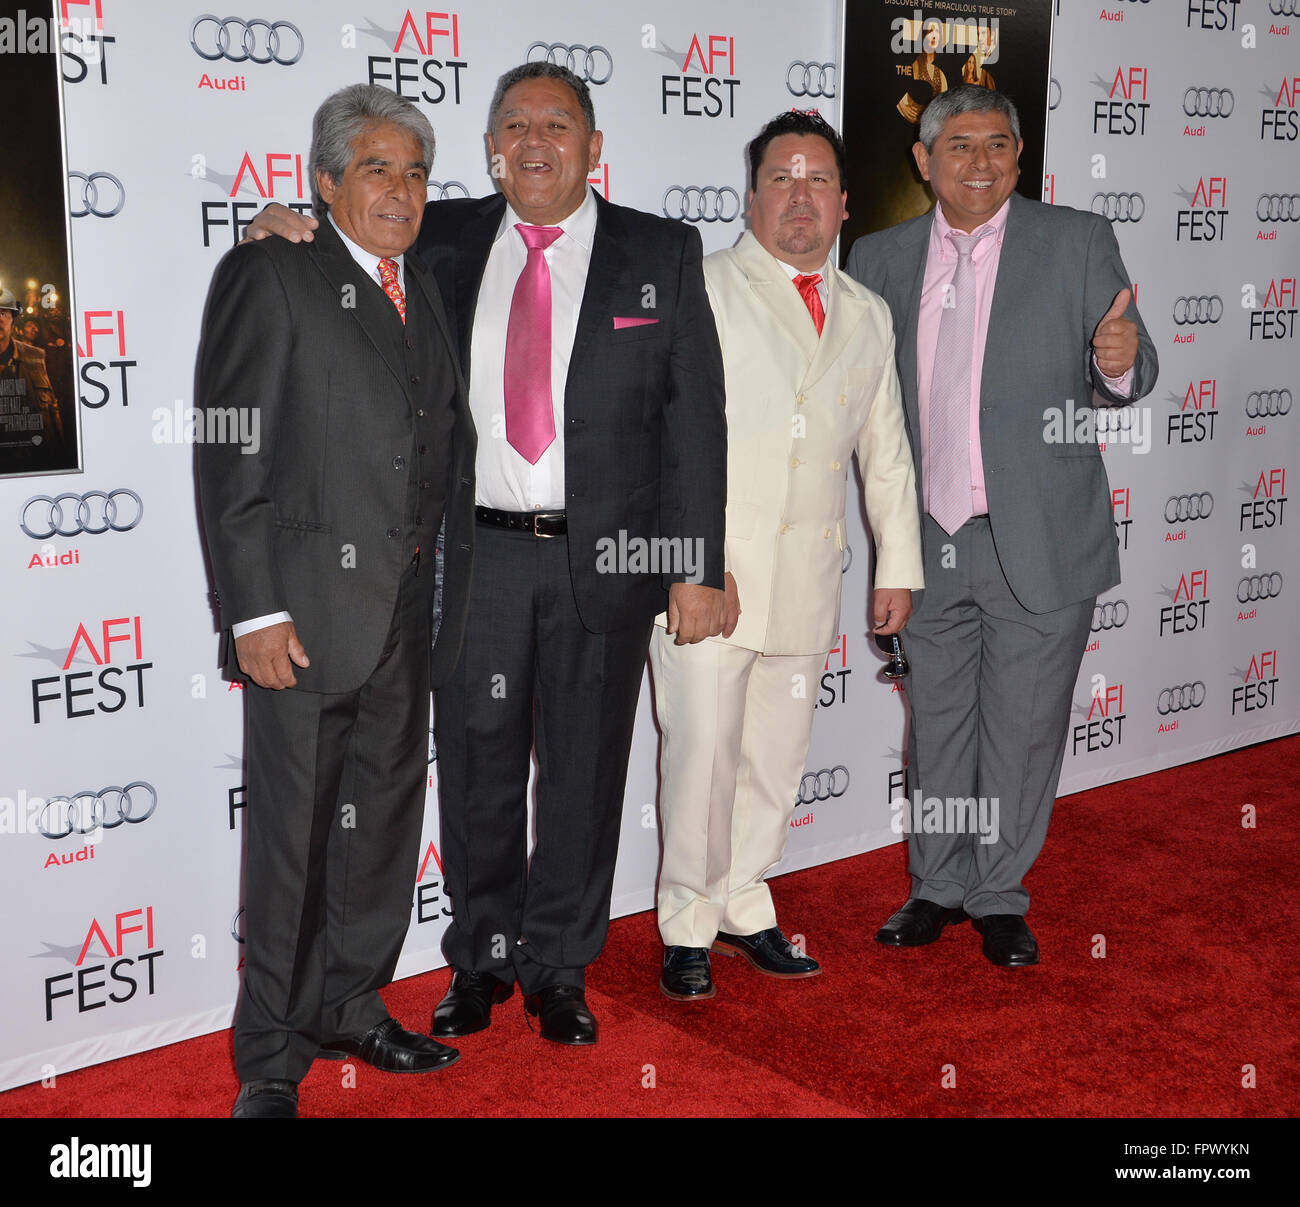 LOS ANGELES, CA - NOVEMBER 9, 2015: Chilean miners Mario Gomez, Luis Urzua, Edison Pena & Juan Carlos Aguilar at the premiere of 'The 33', part of the AFI FEST 2015, at the TCL Chinese Theatre, Hollywood. Stock Photo